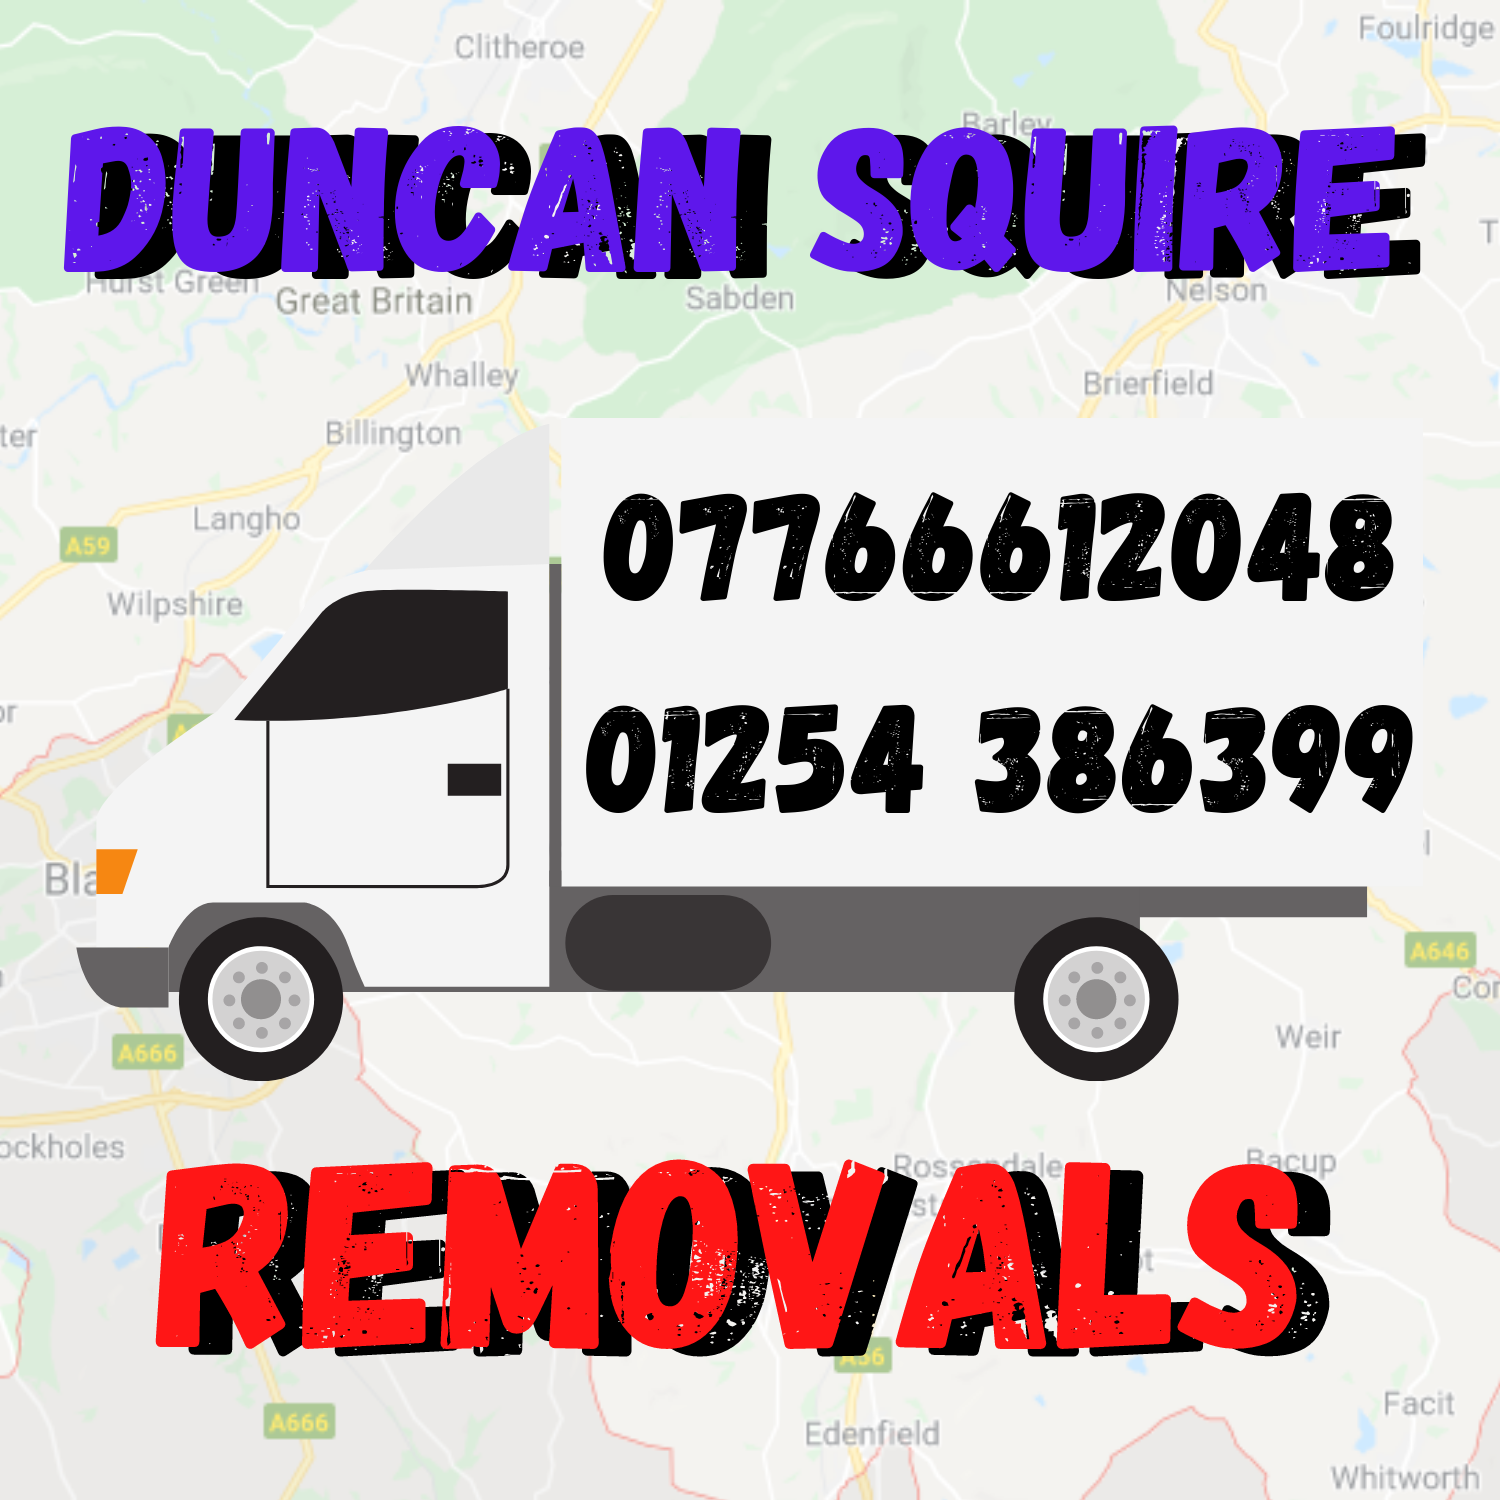 duncan squire removals (1)